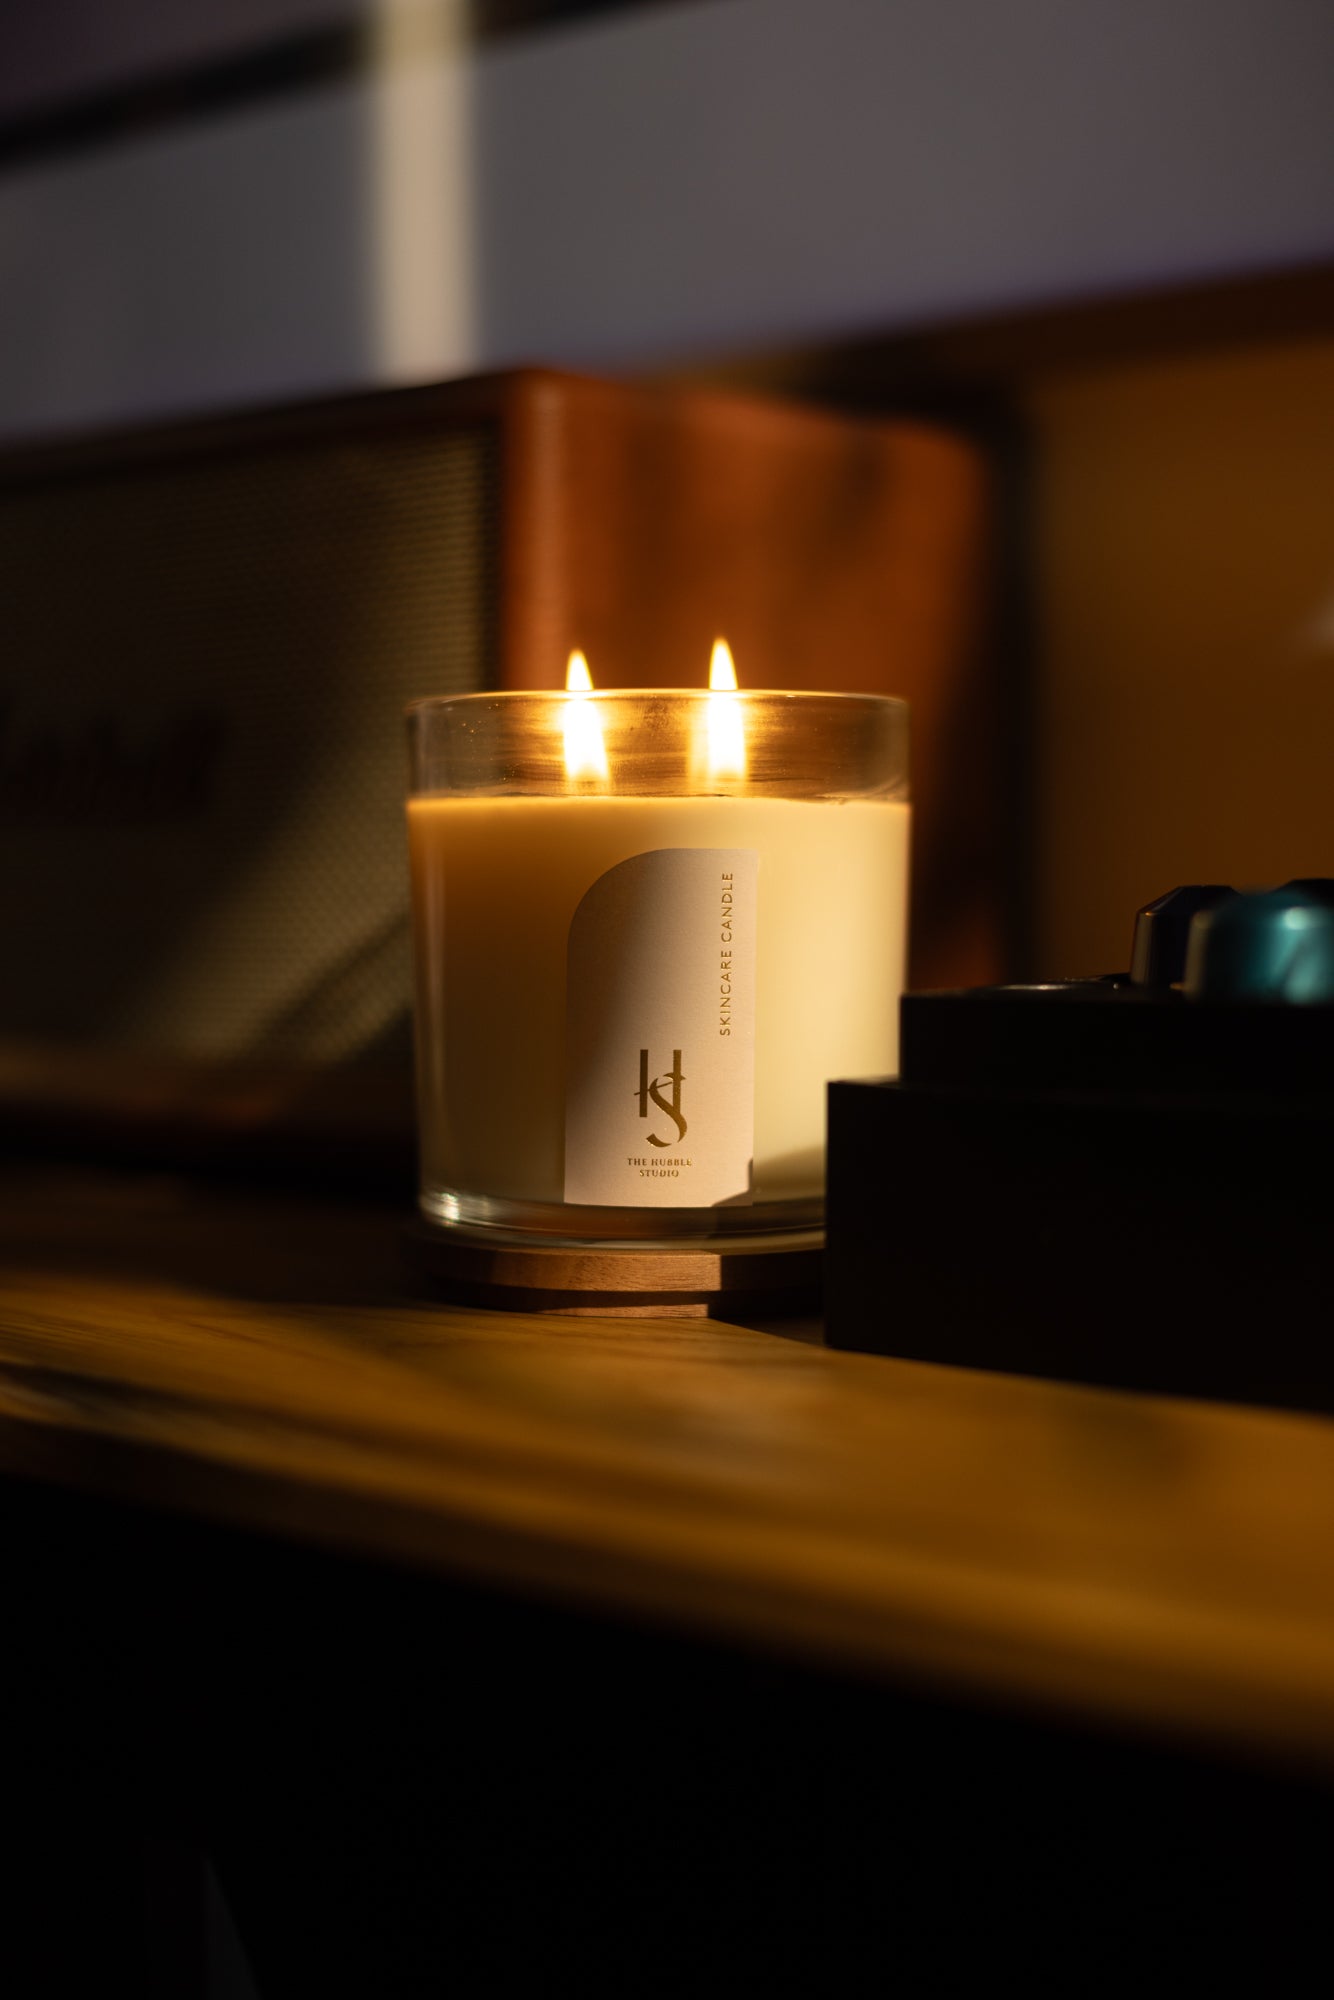 The Hubble Studio Skincare Candle lighting up on table